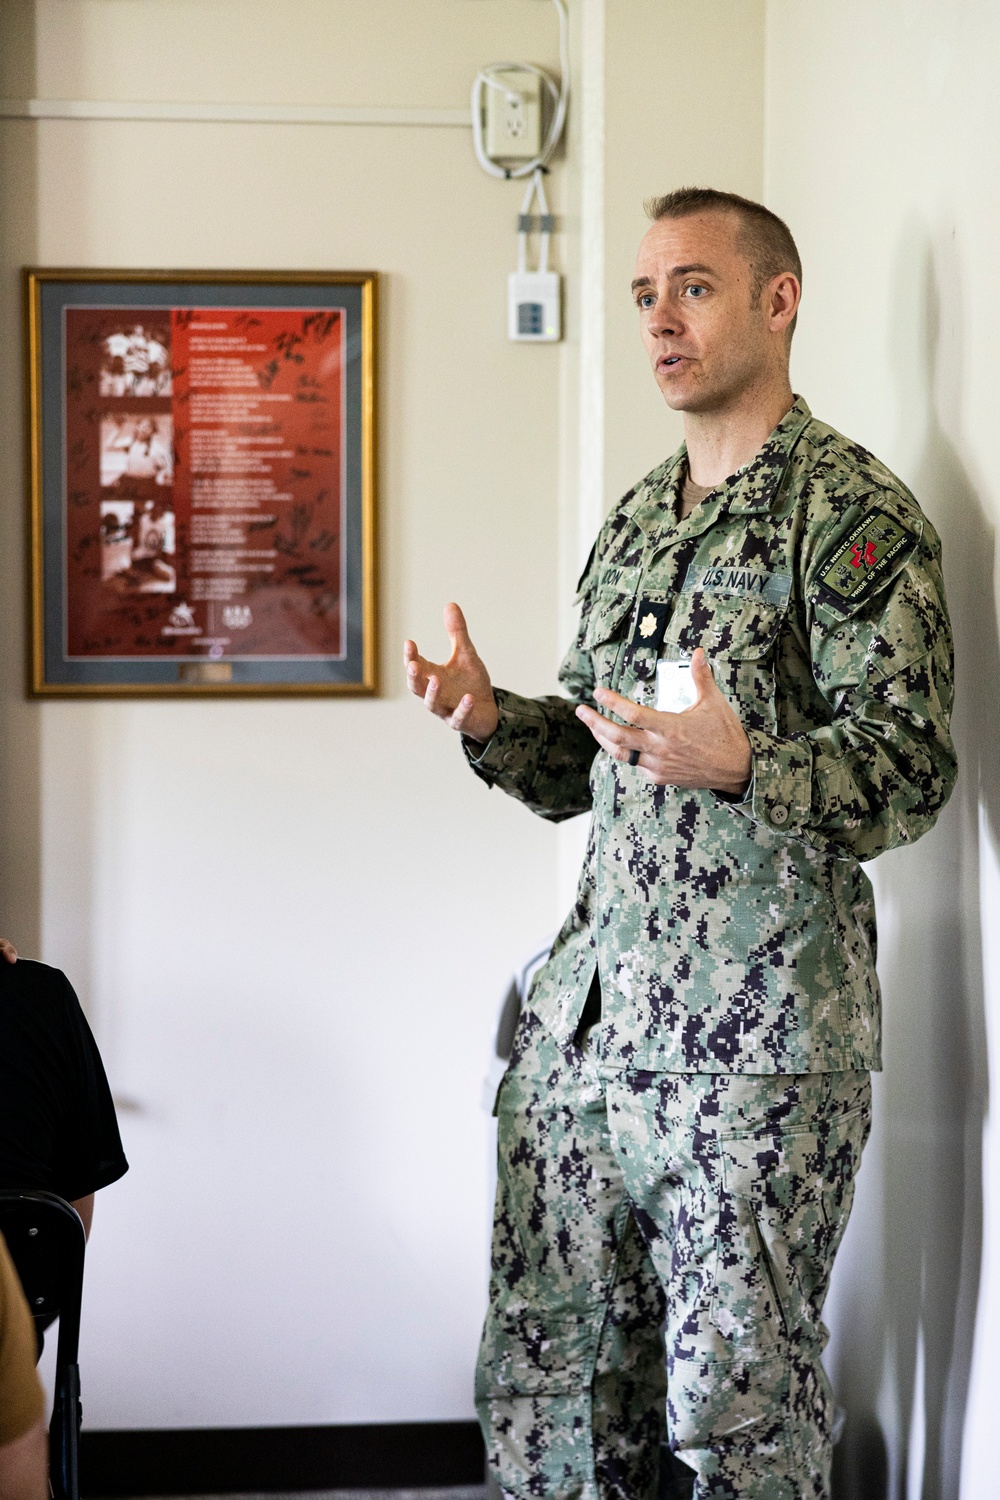 Exceptional Family Member Program teaches support for neurodivergent community in Okinawa